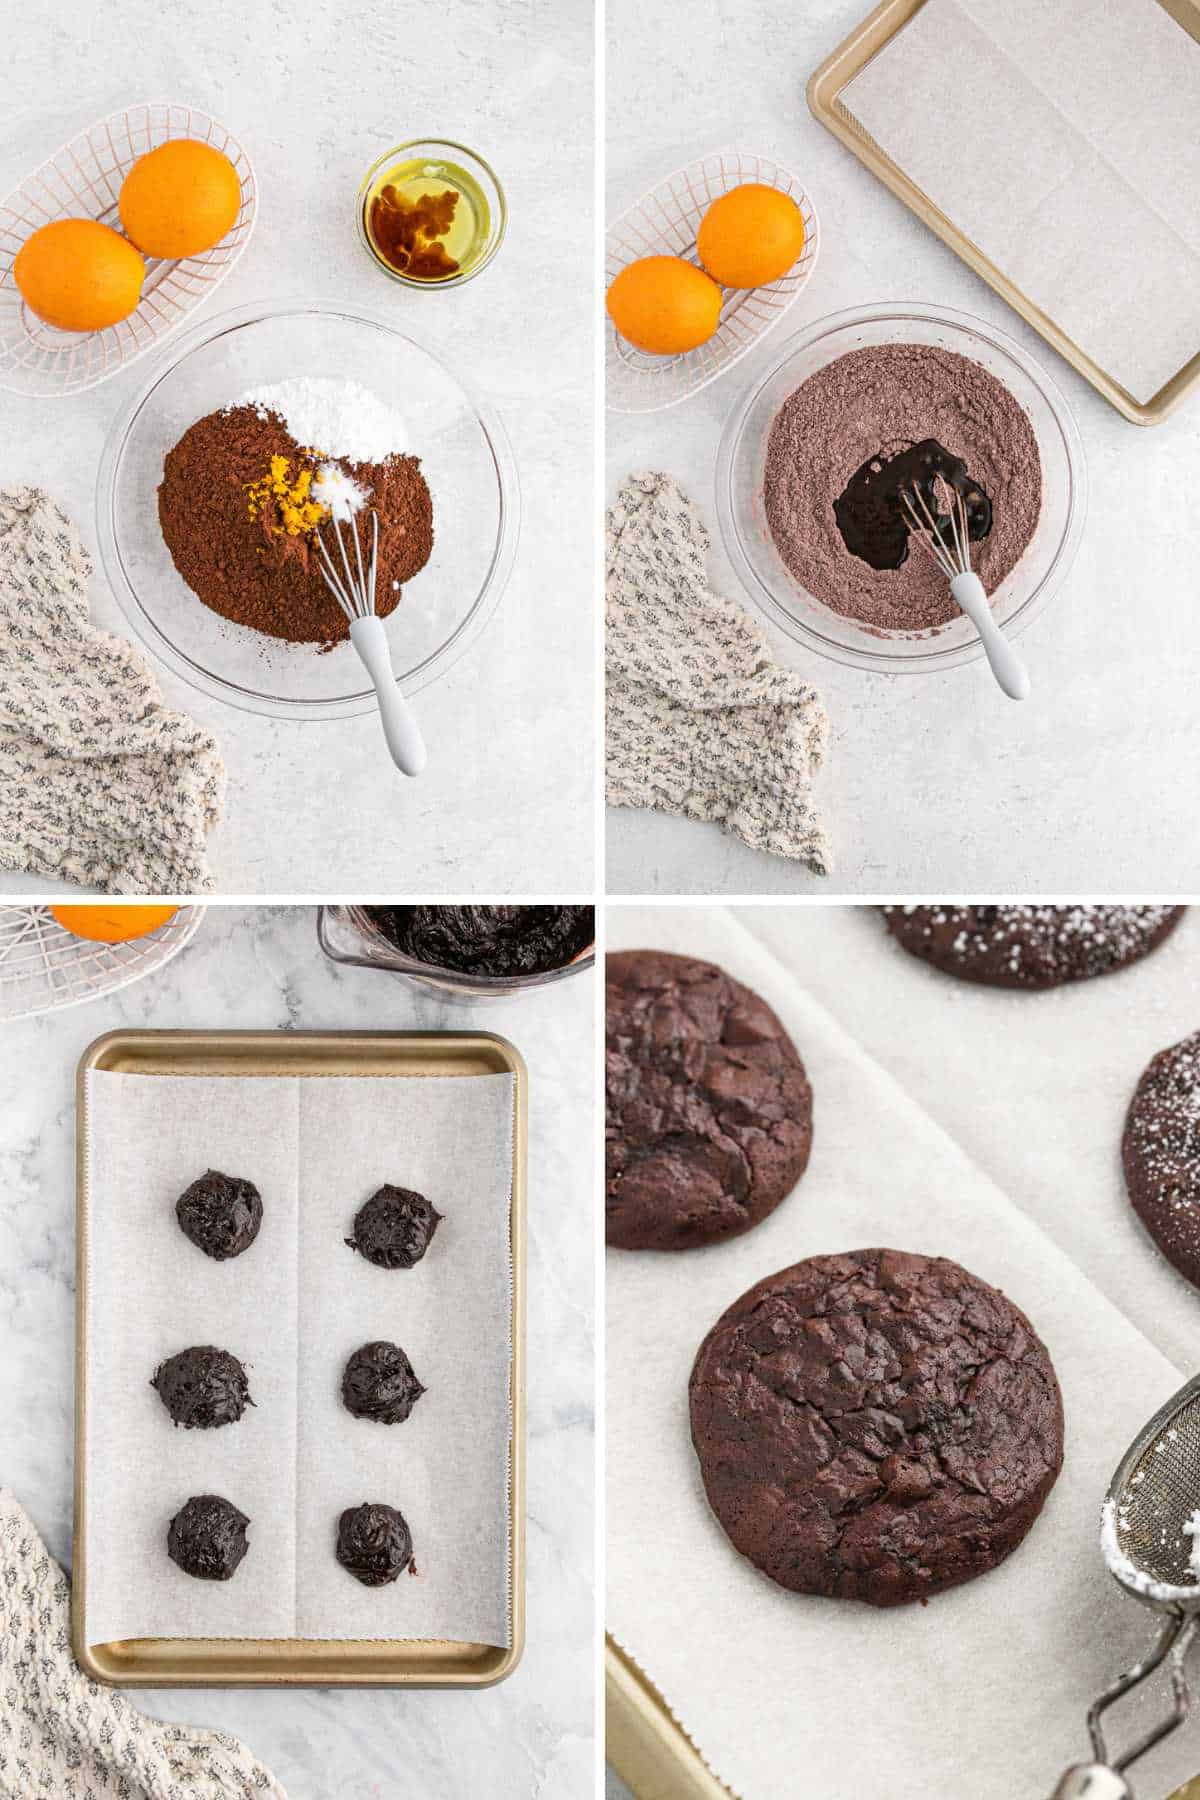 A collage of images showing how to make chocolate orange cookies.